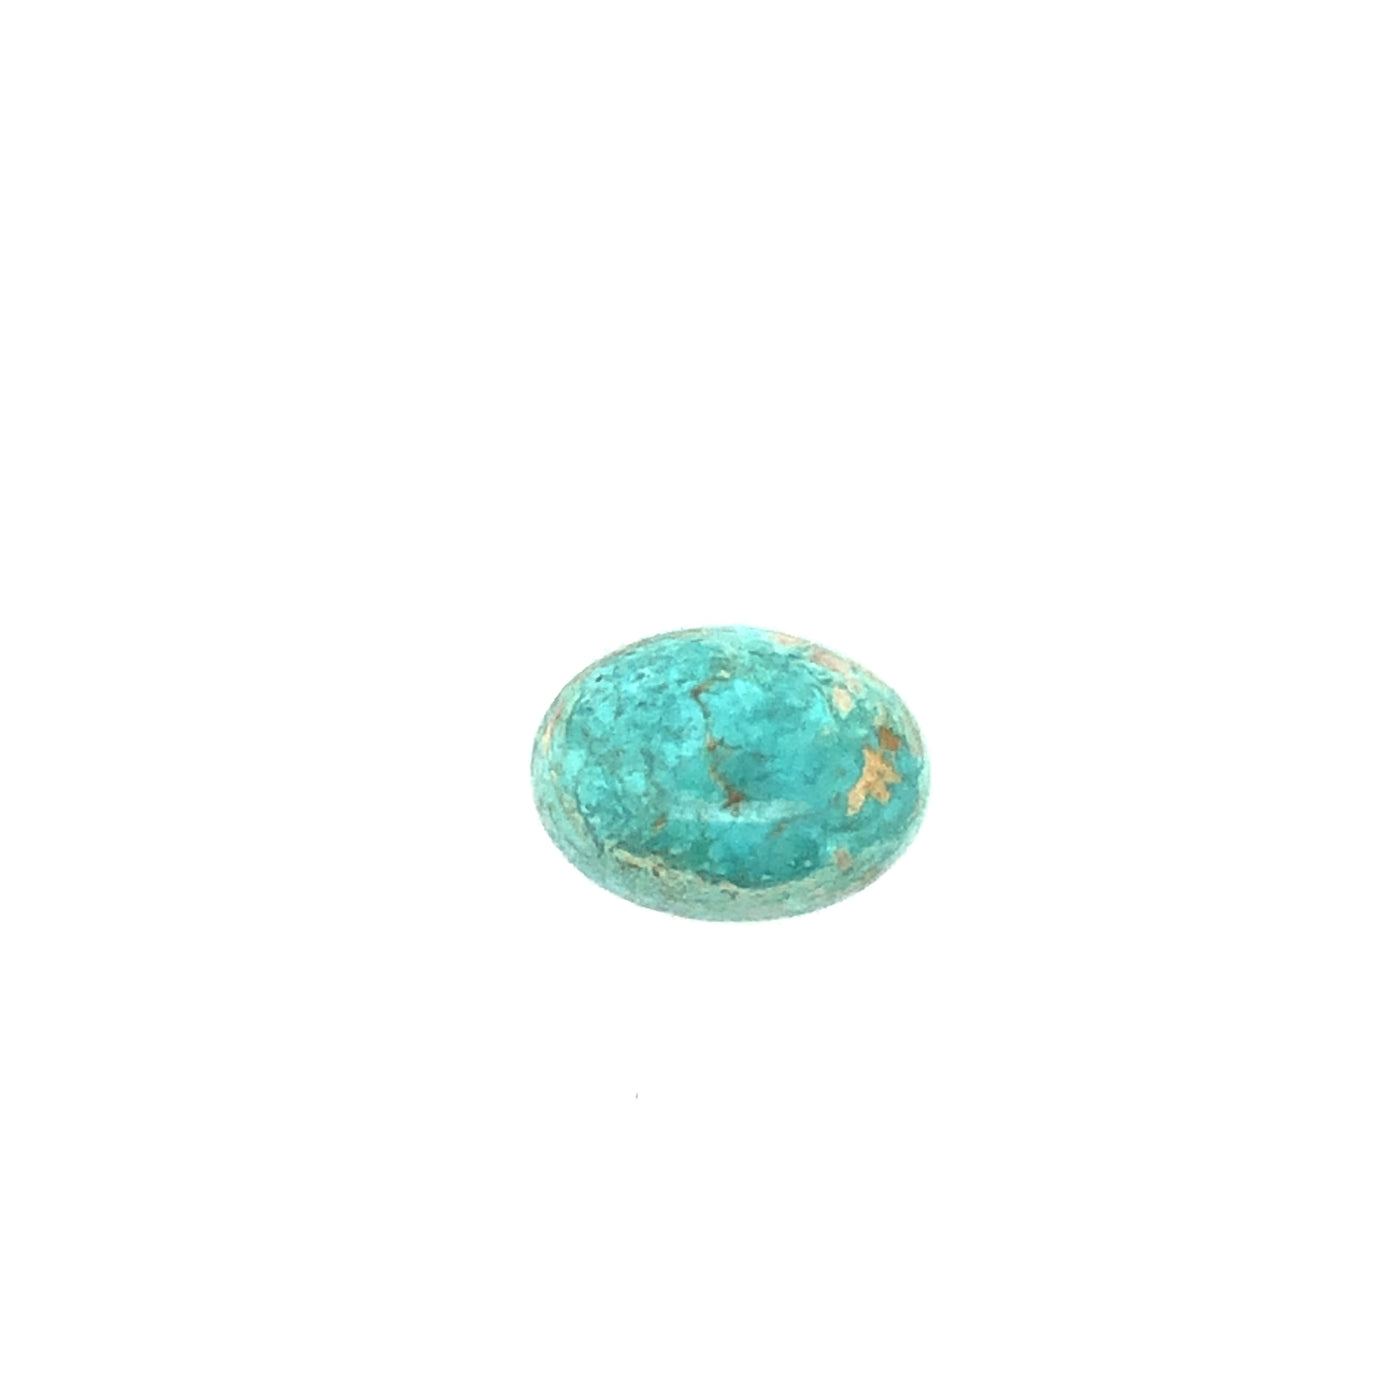 Loose Narooma Turquoise Oval Shaped 11.51Ct Blue With Some White